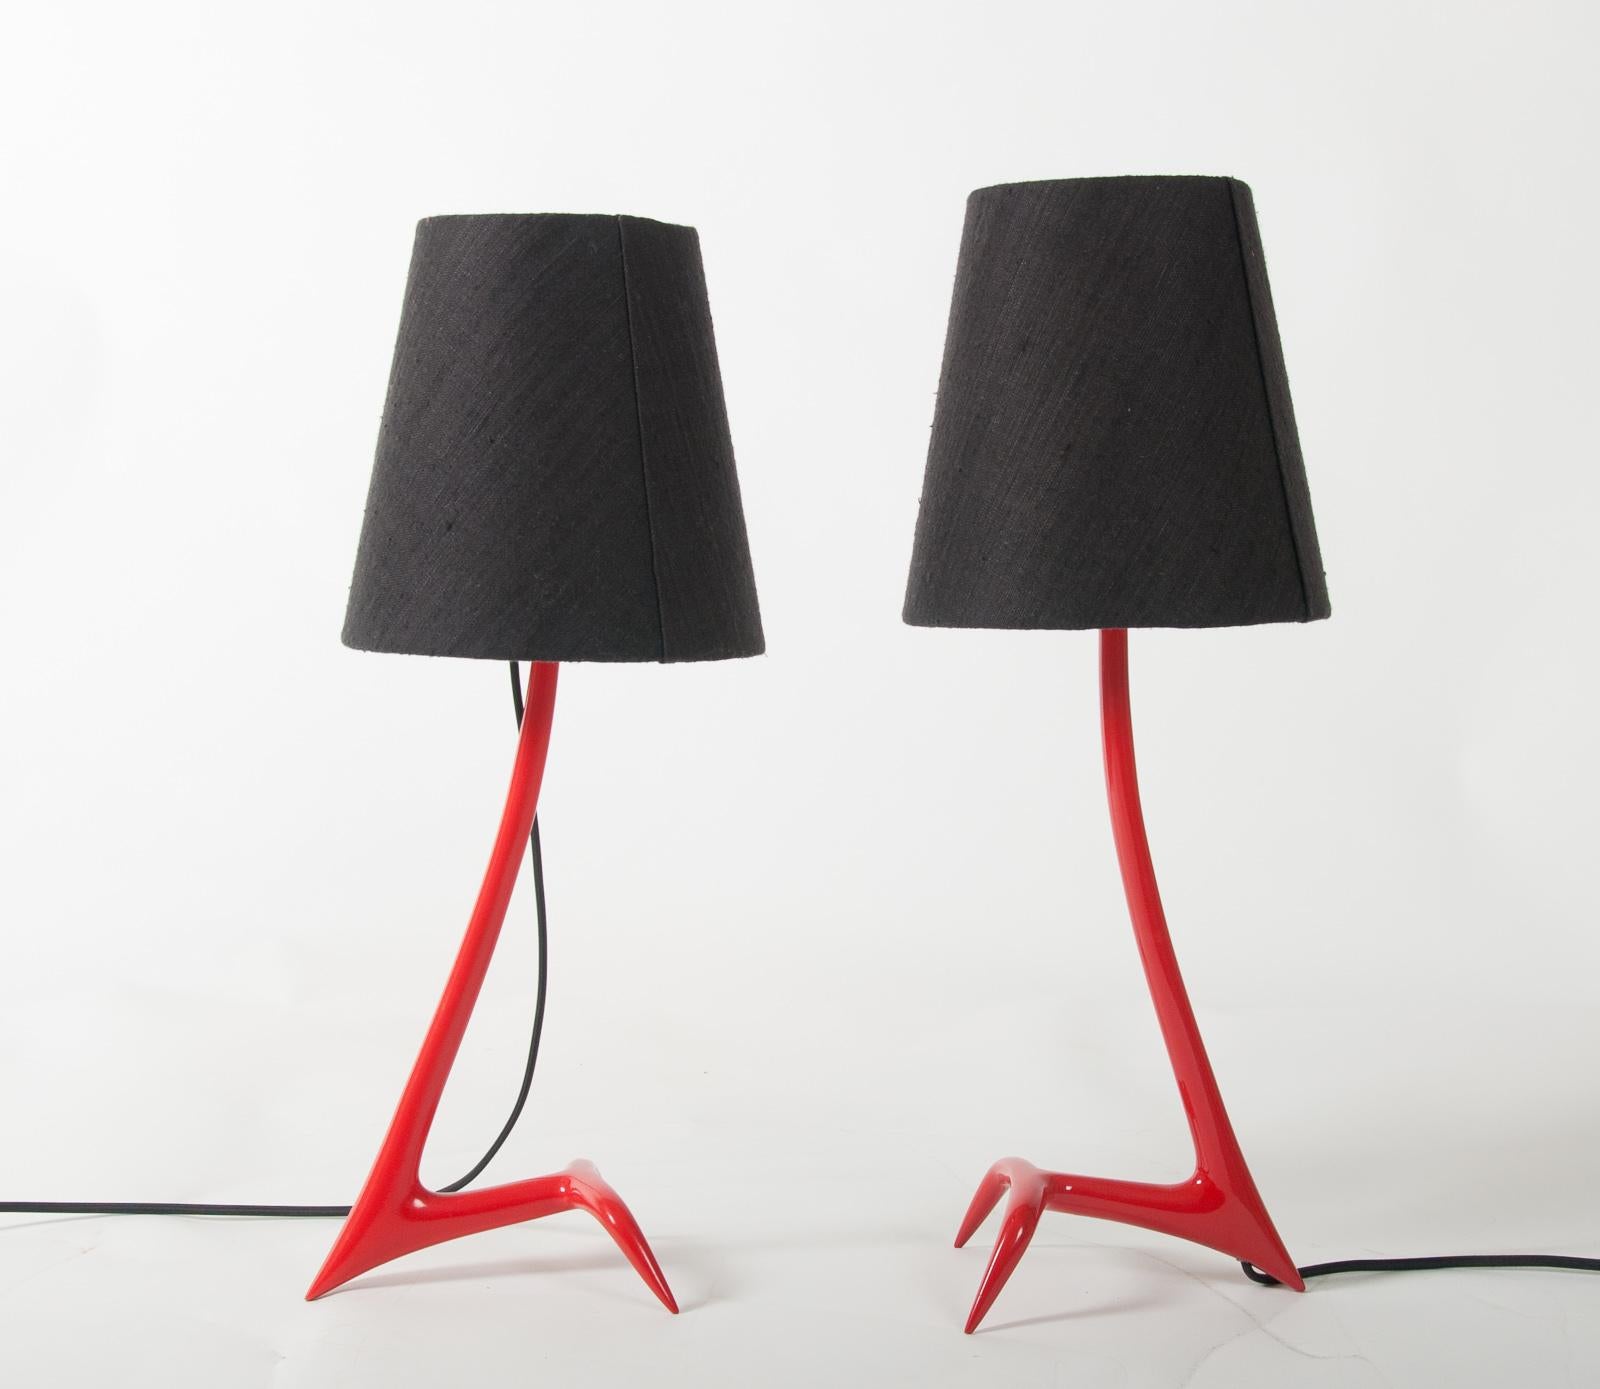 Matched Pair of Stockholm Table Lamps by Maison Charles 1